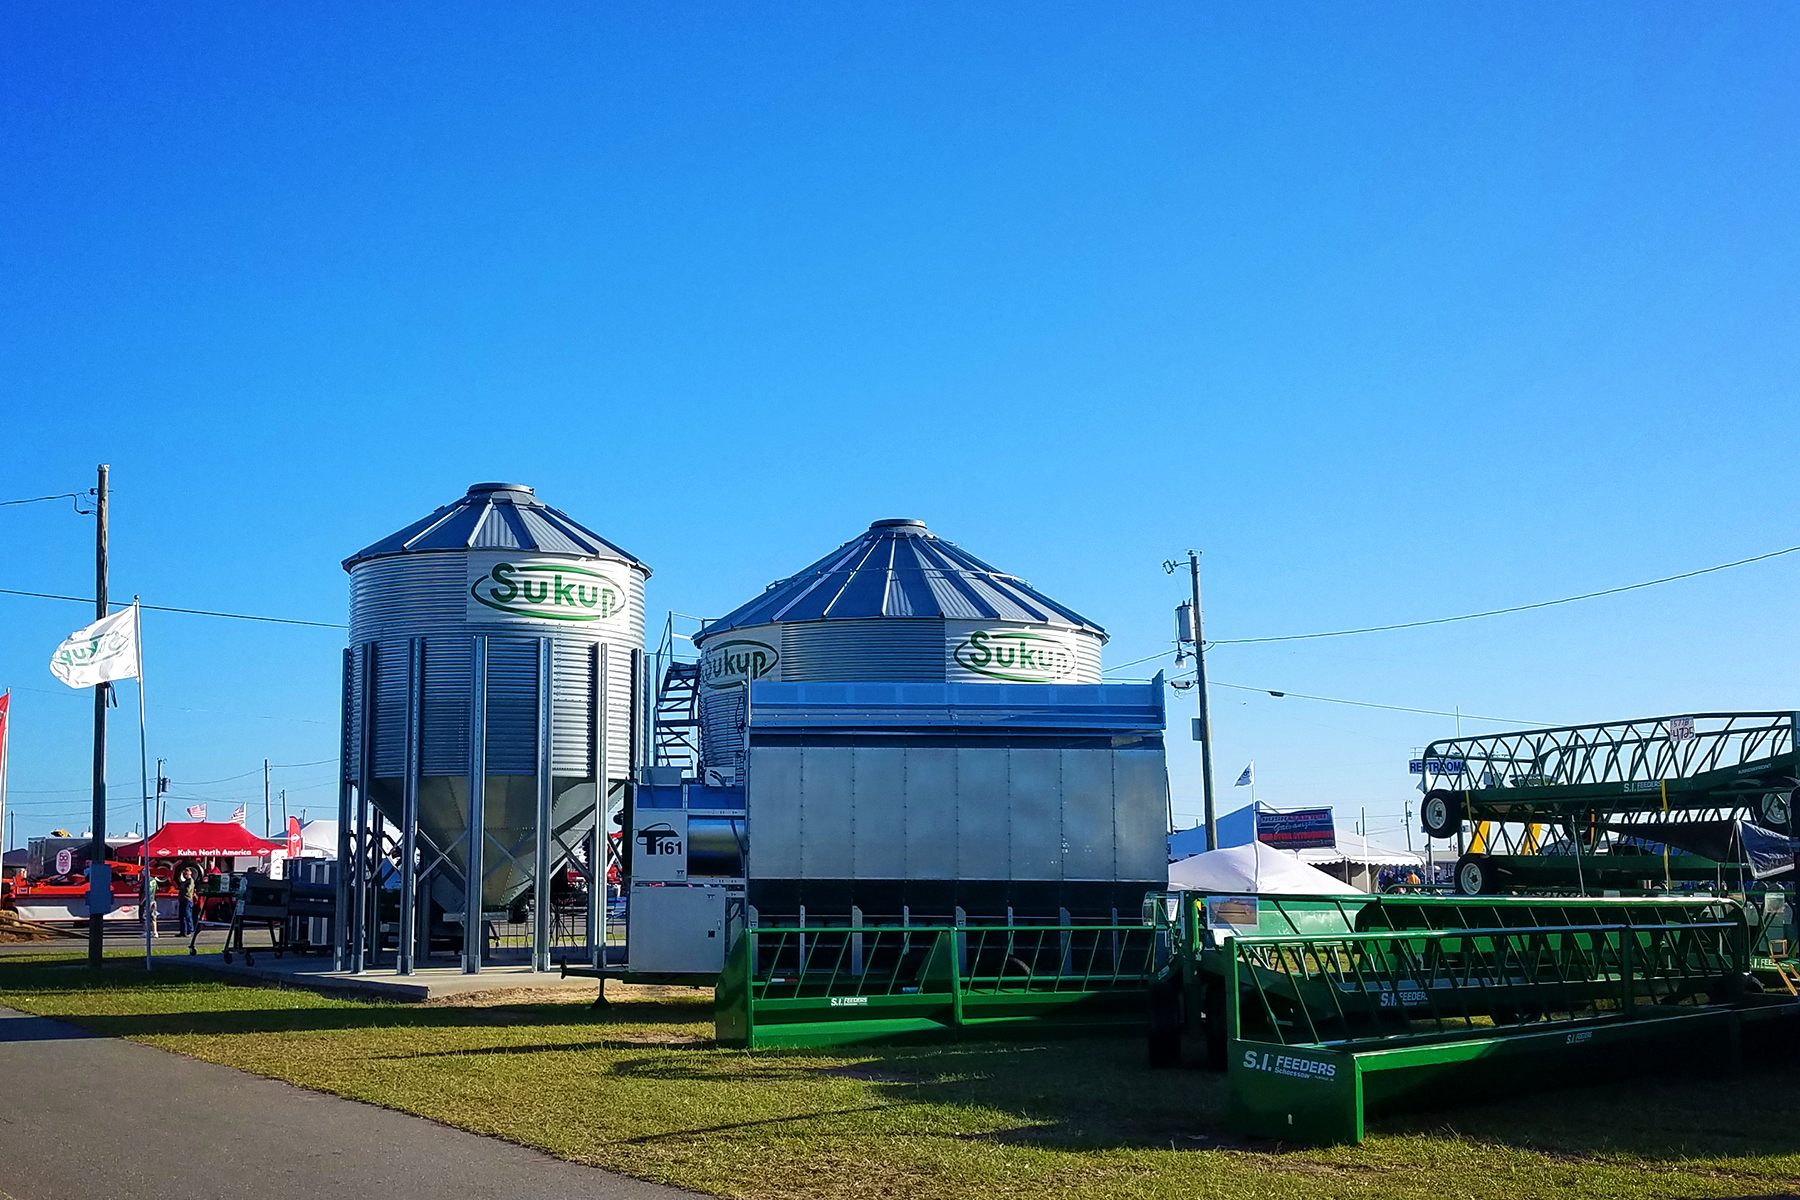 Sukup Manufacturing Co. at the Sunbelt Ag Expo in 2017.